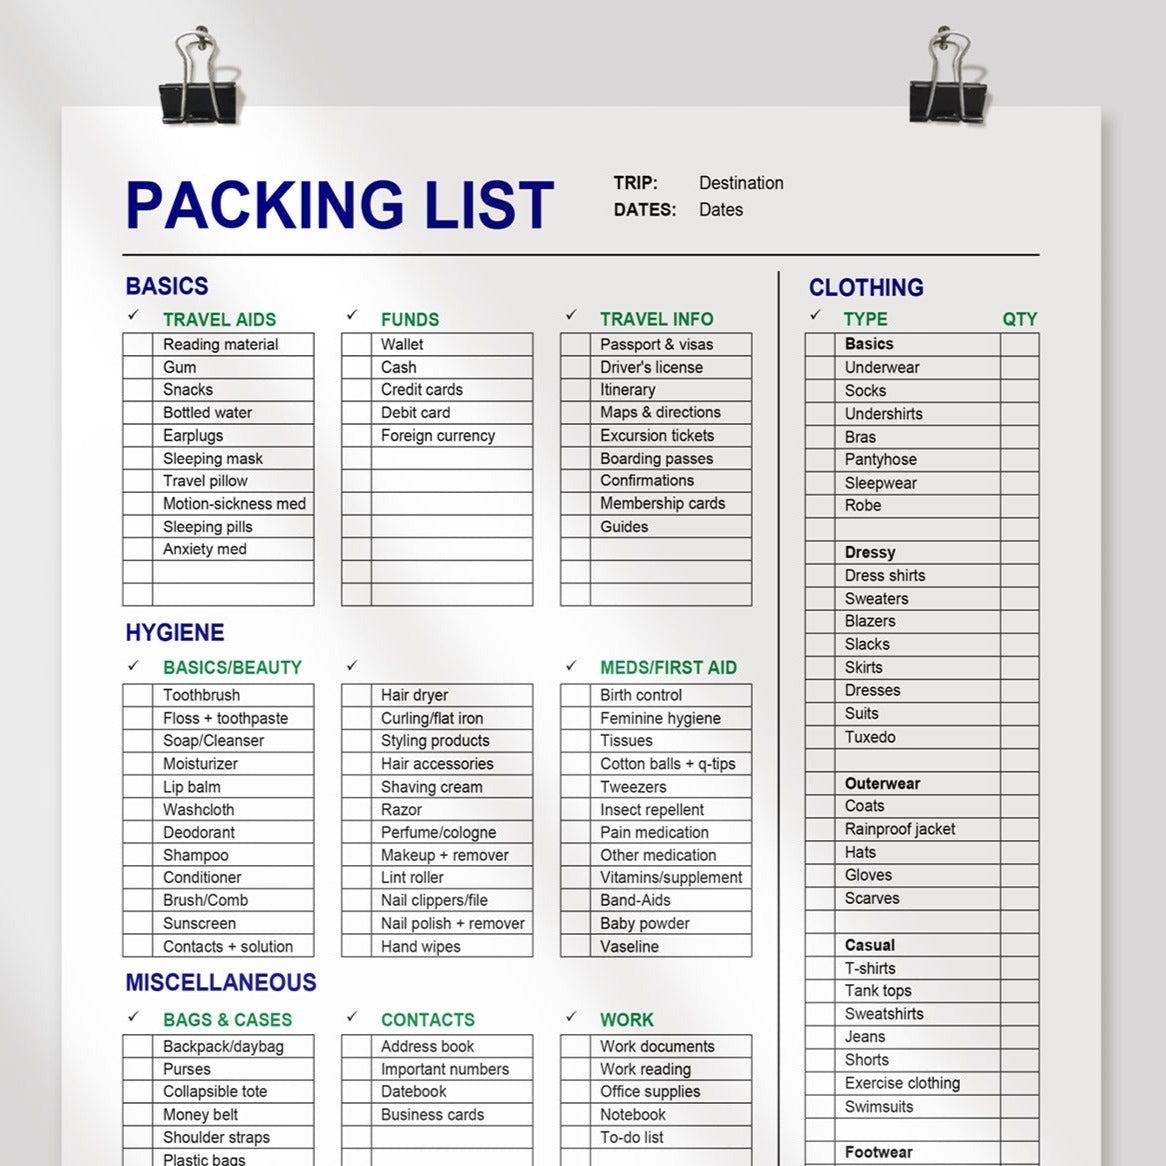 Travel Packing List